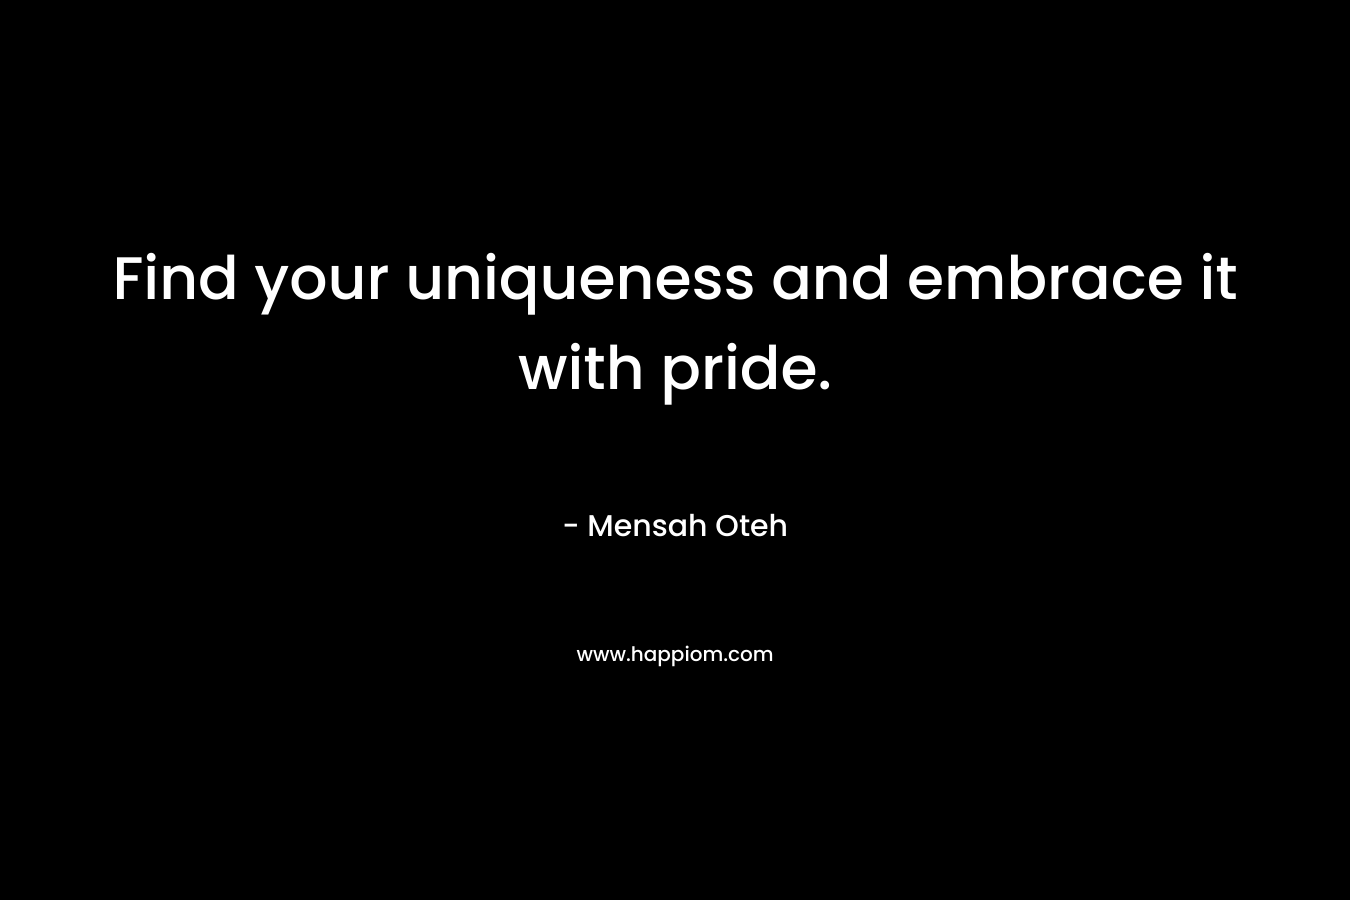 Find your uniqueness and embrace it with pride. – Mensah Oteh